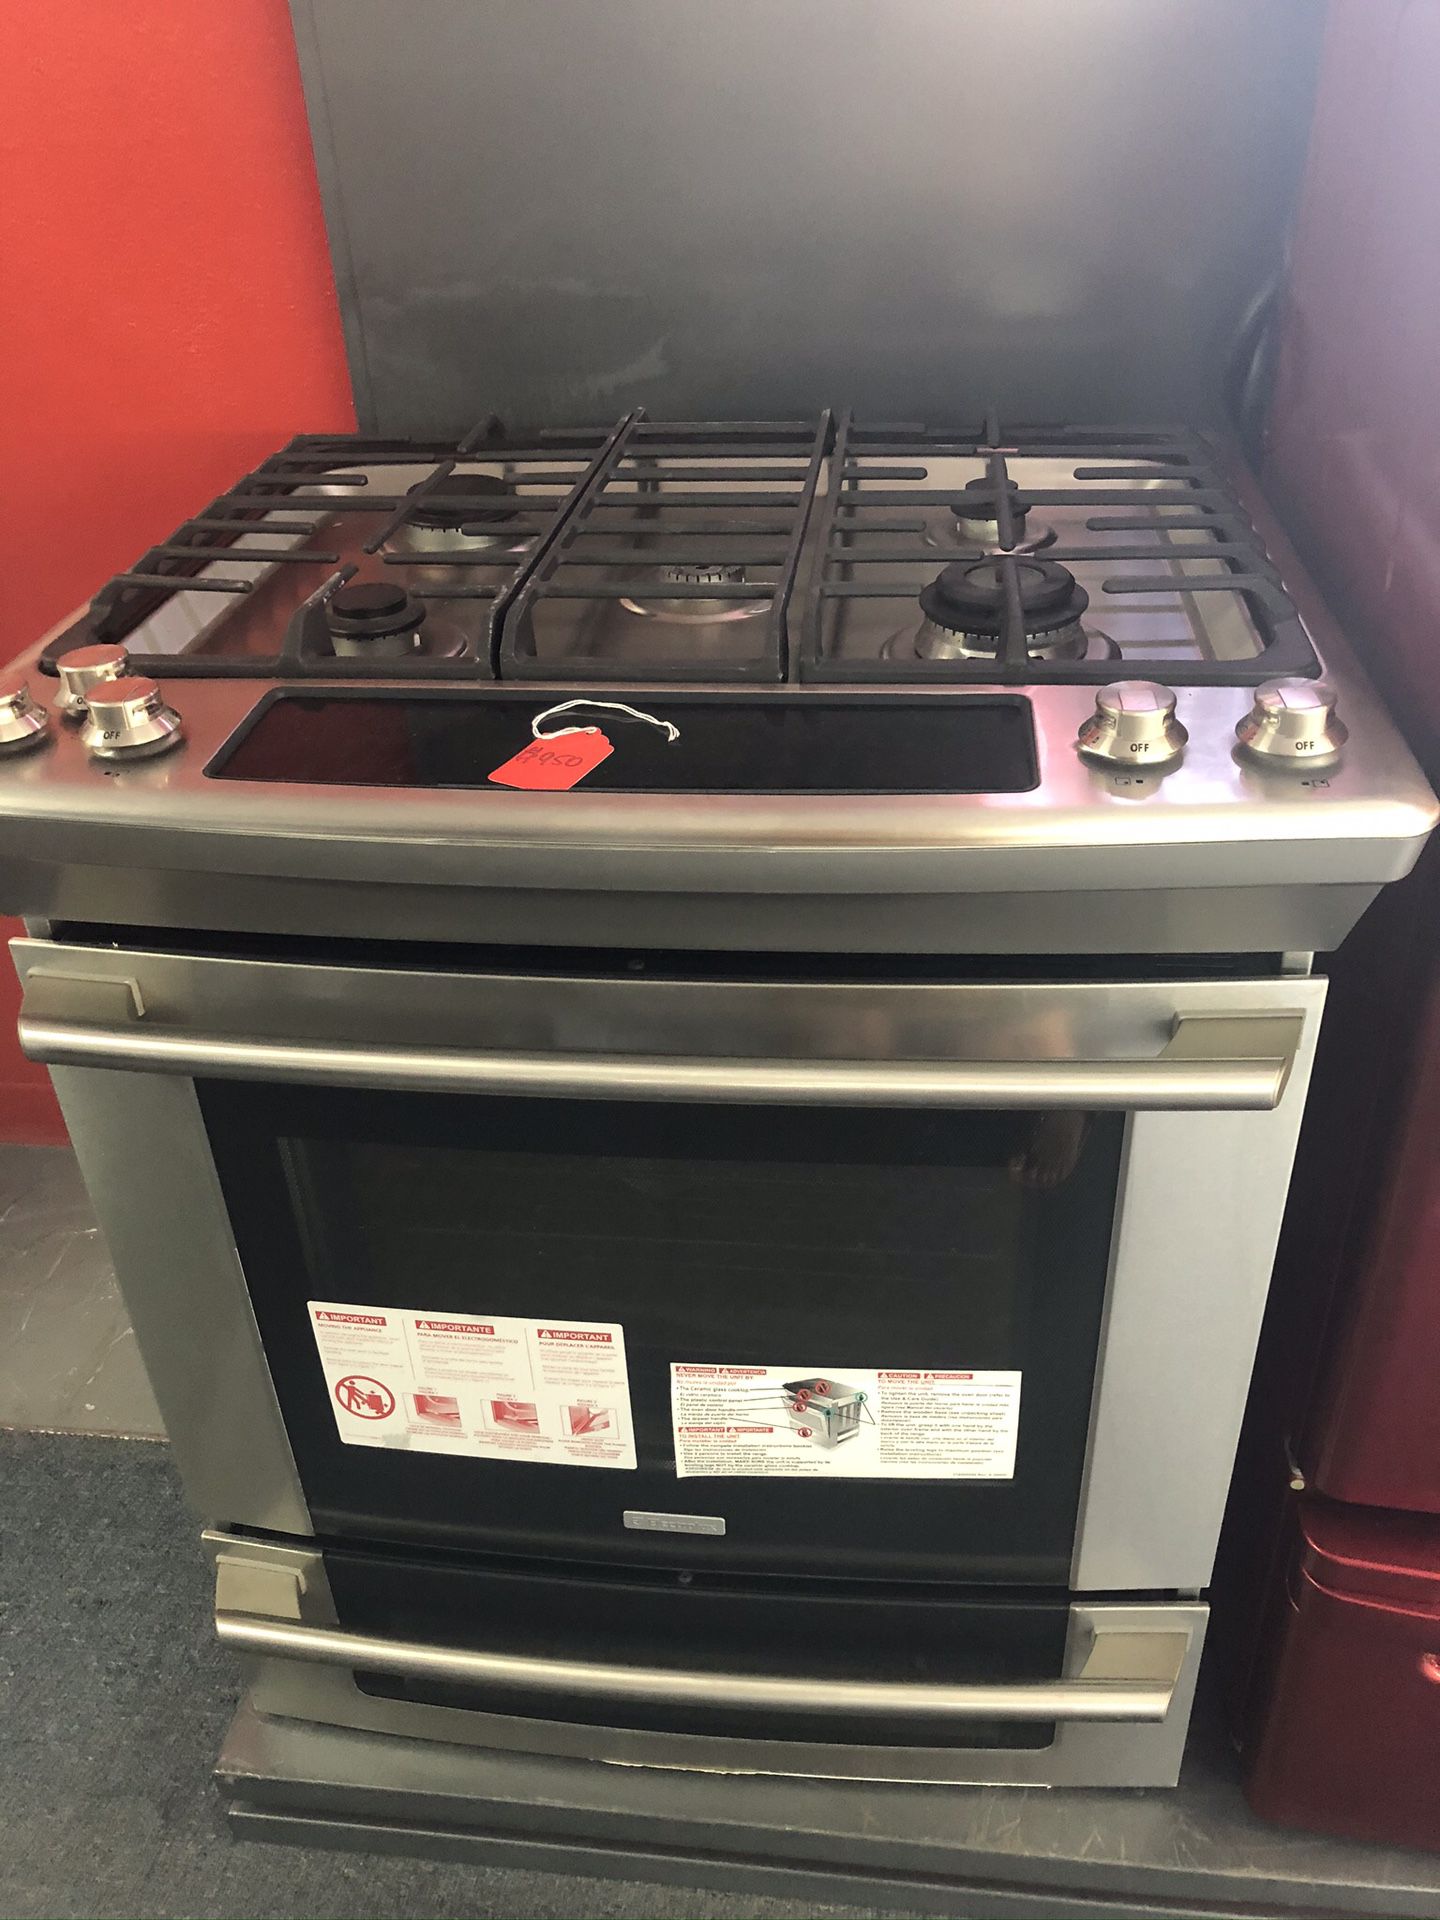 New scratch and dent Electrolux 5 burner gas stainless steel range. 1 year warranty